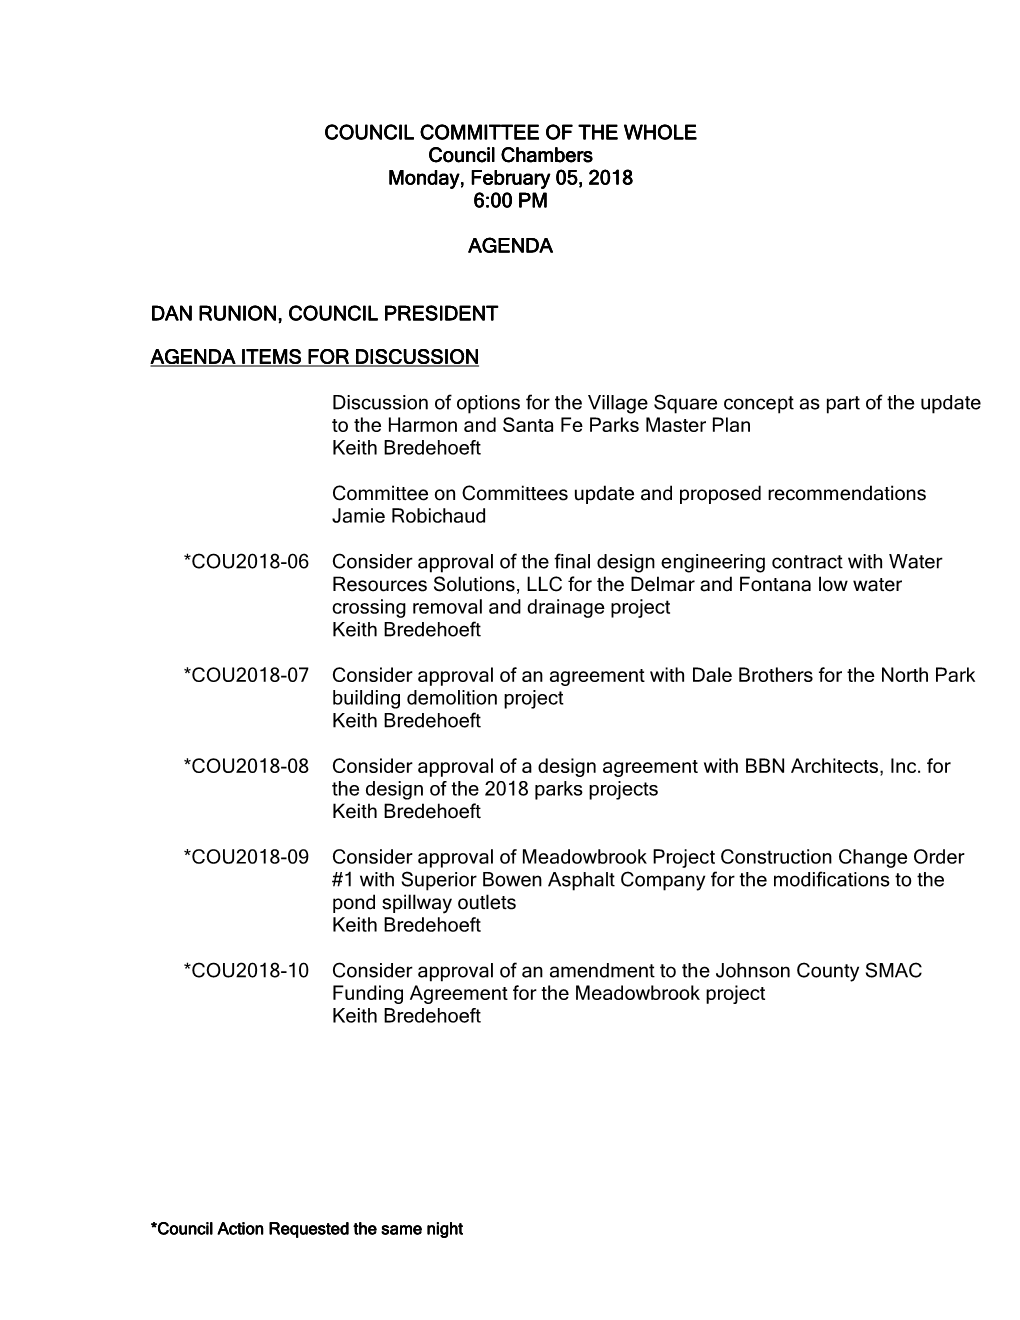 COUNCIL COMMITTEE of the WHOLE Council Chambers Monday, February 05, 2018 6:00 PM